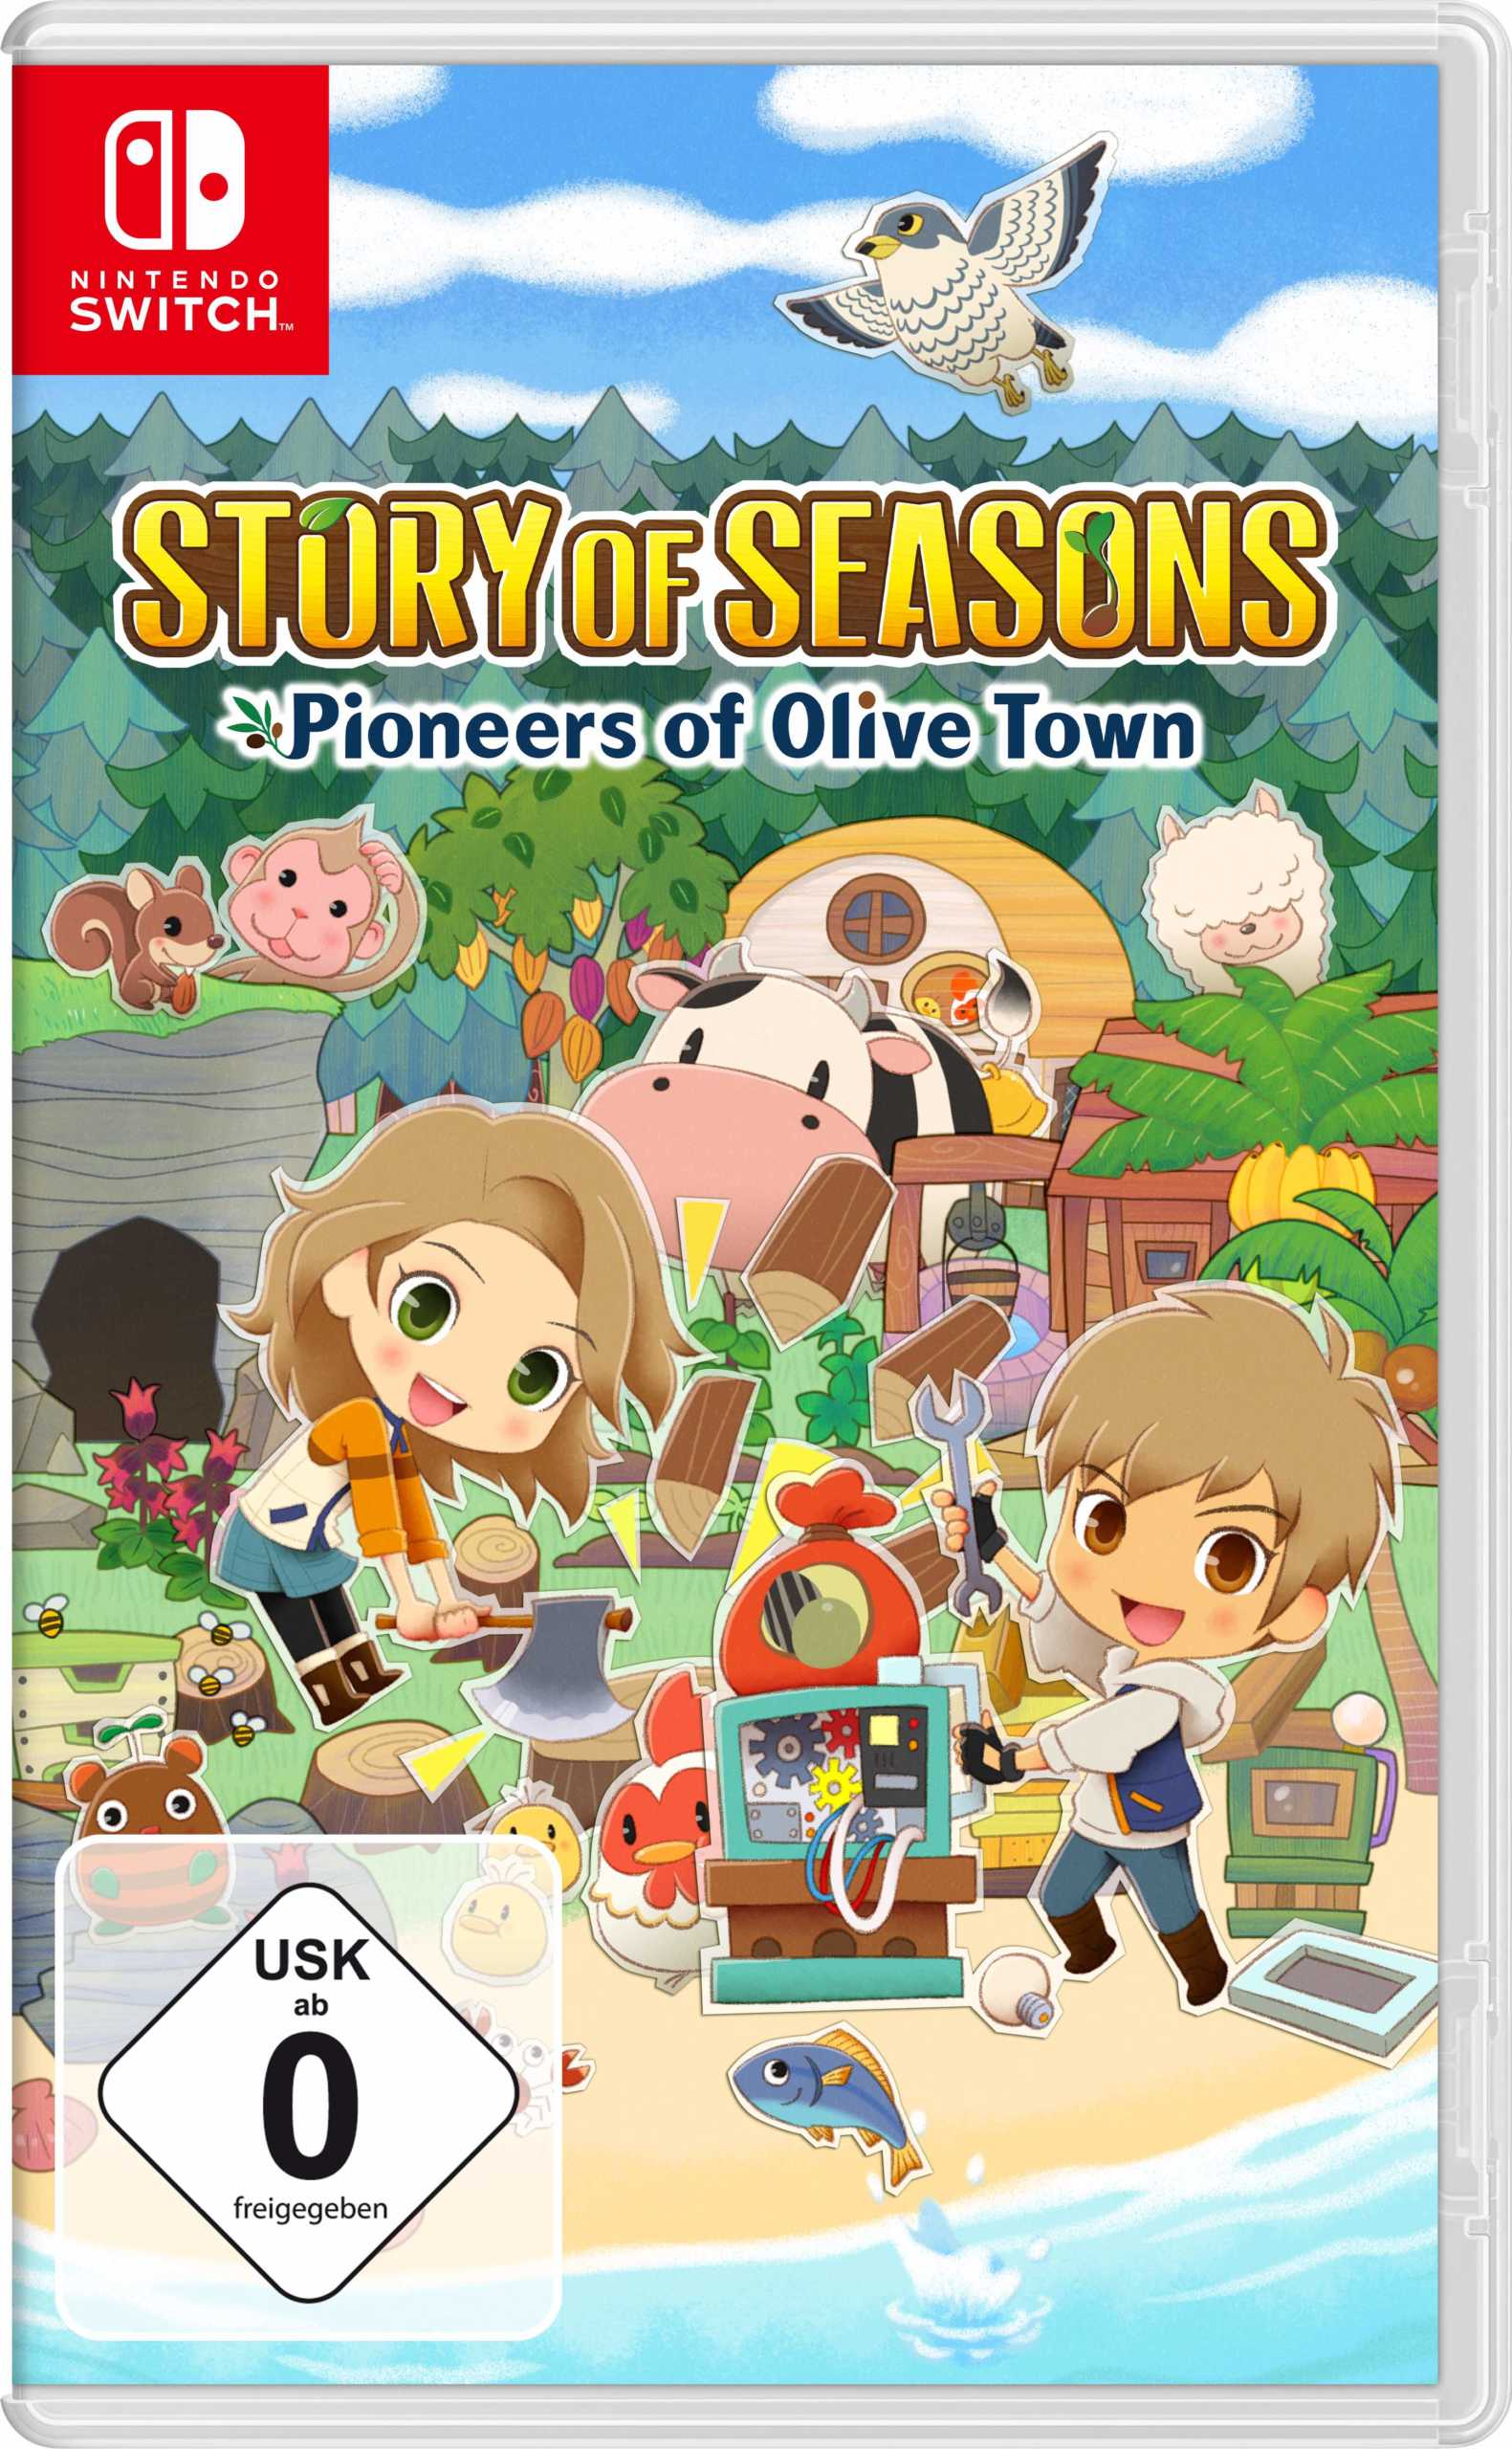 Featured image for “STORY OF SEASONS: Pioneers of Olive Town”